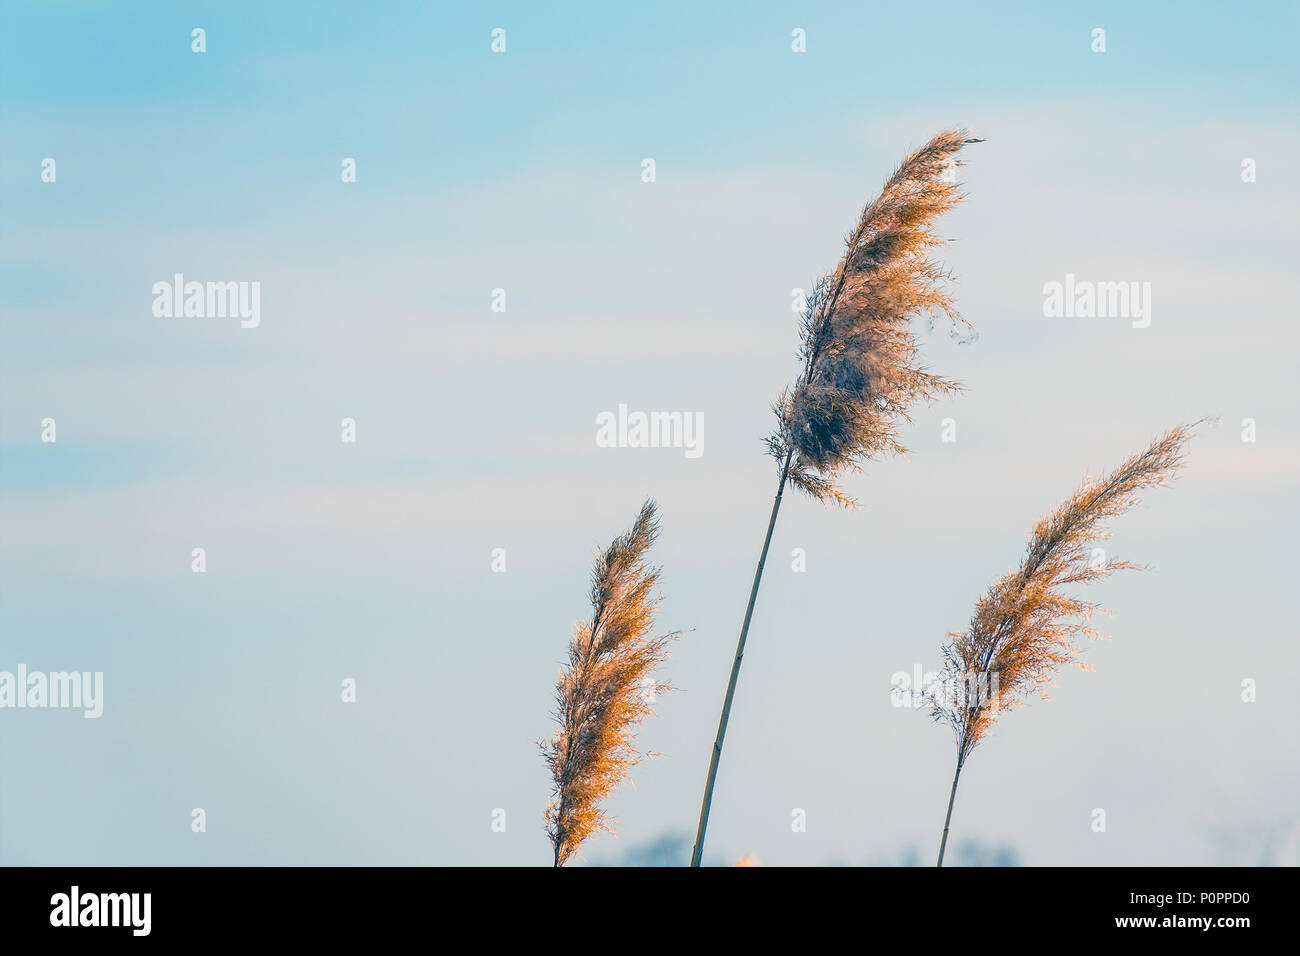 Dry grass swaying in the wind Stock Photo